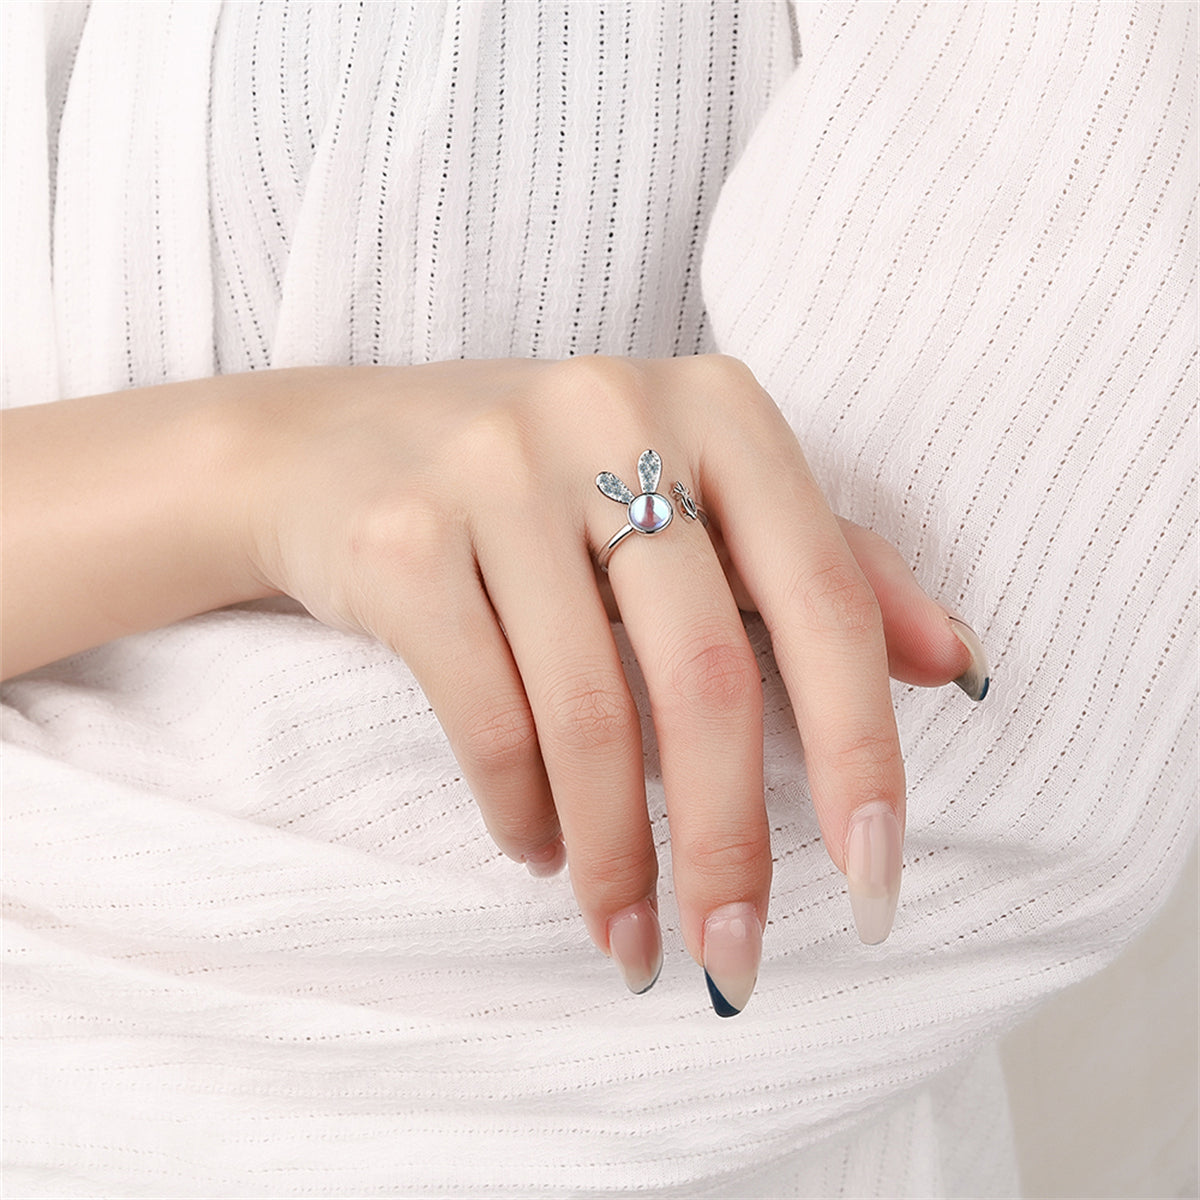 Moonstone & Cubic Zirconia Silver-Plated Rabbit Bypass Ring